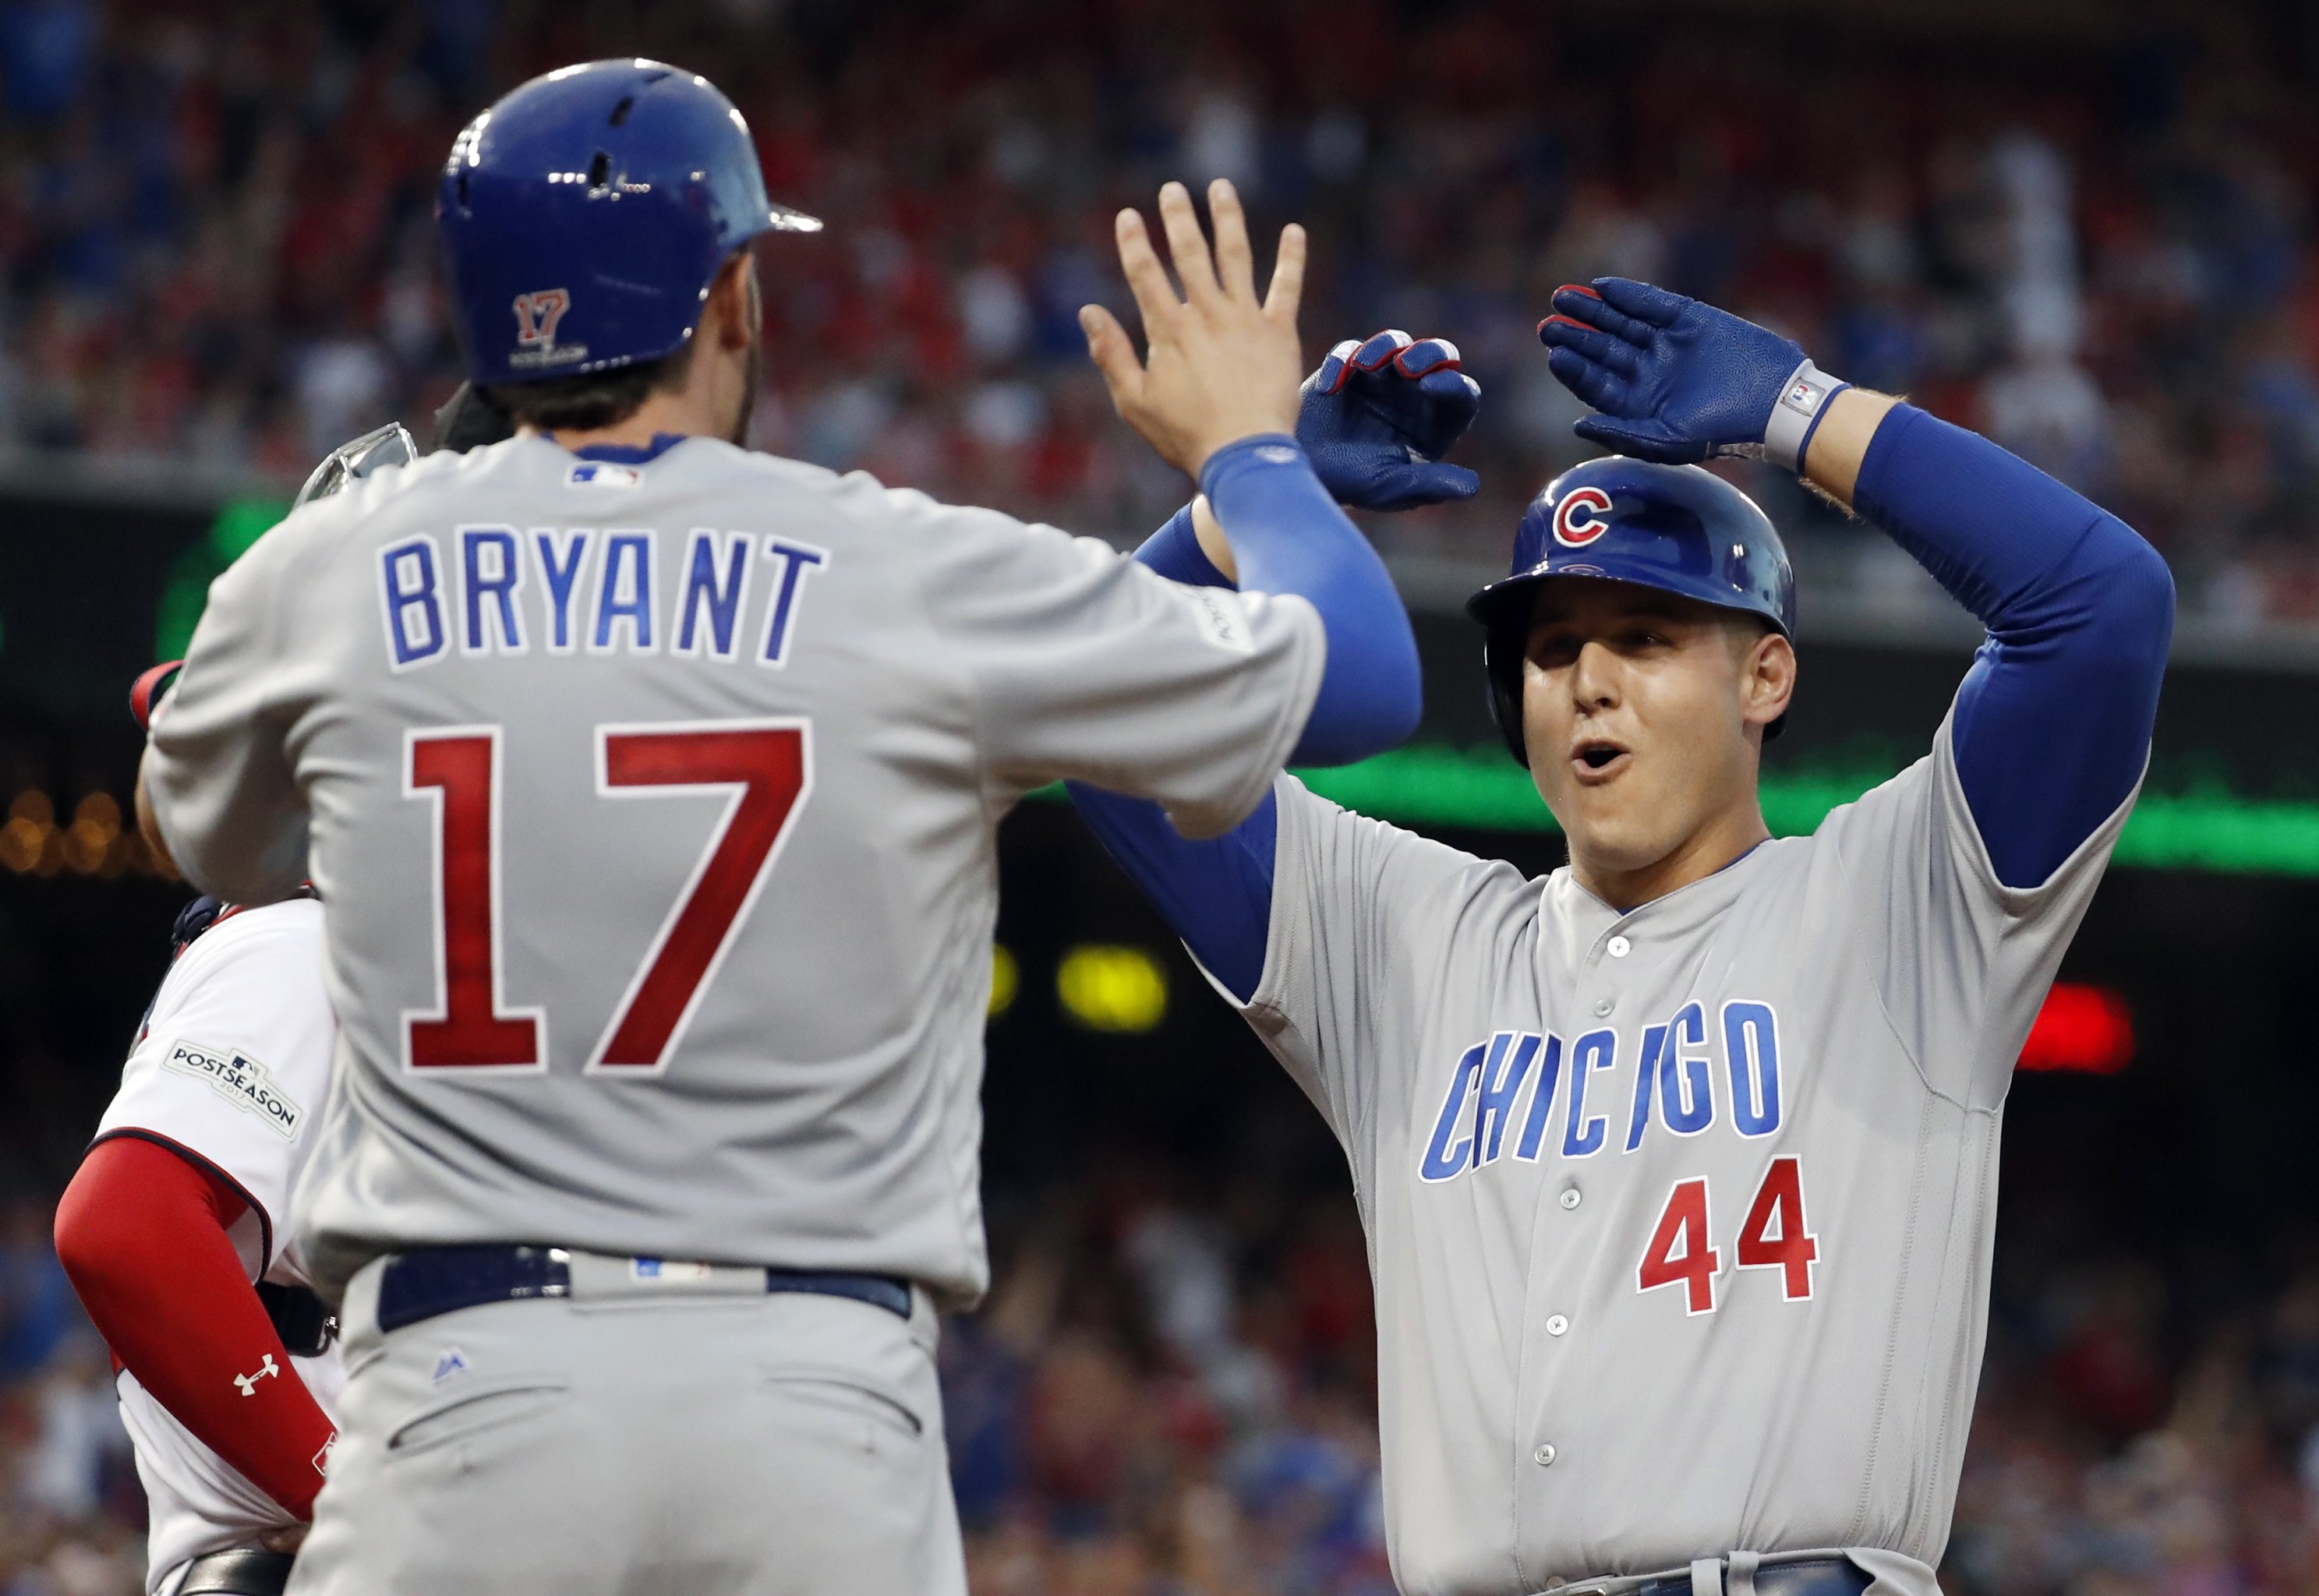 Ranking the Greatest Chicago Cubs Since 2000